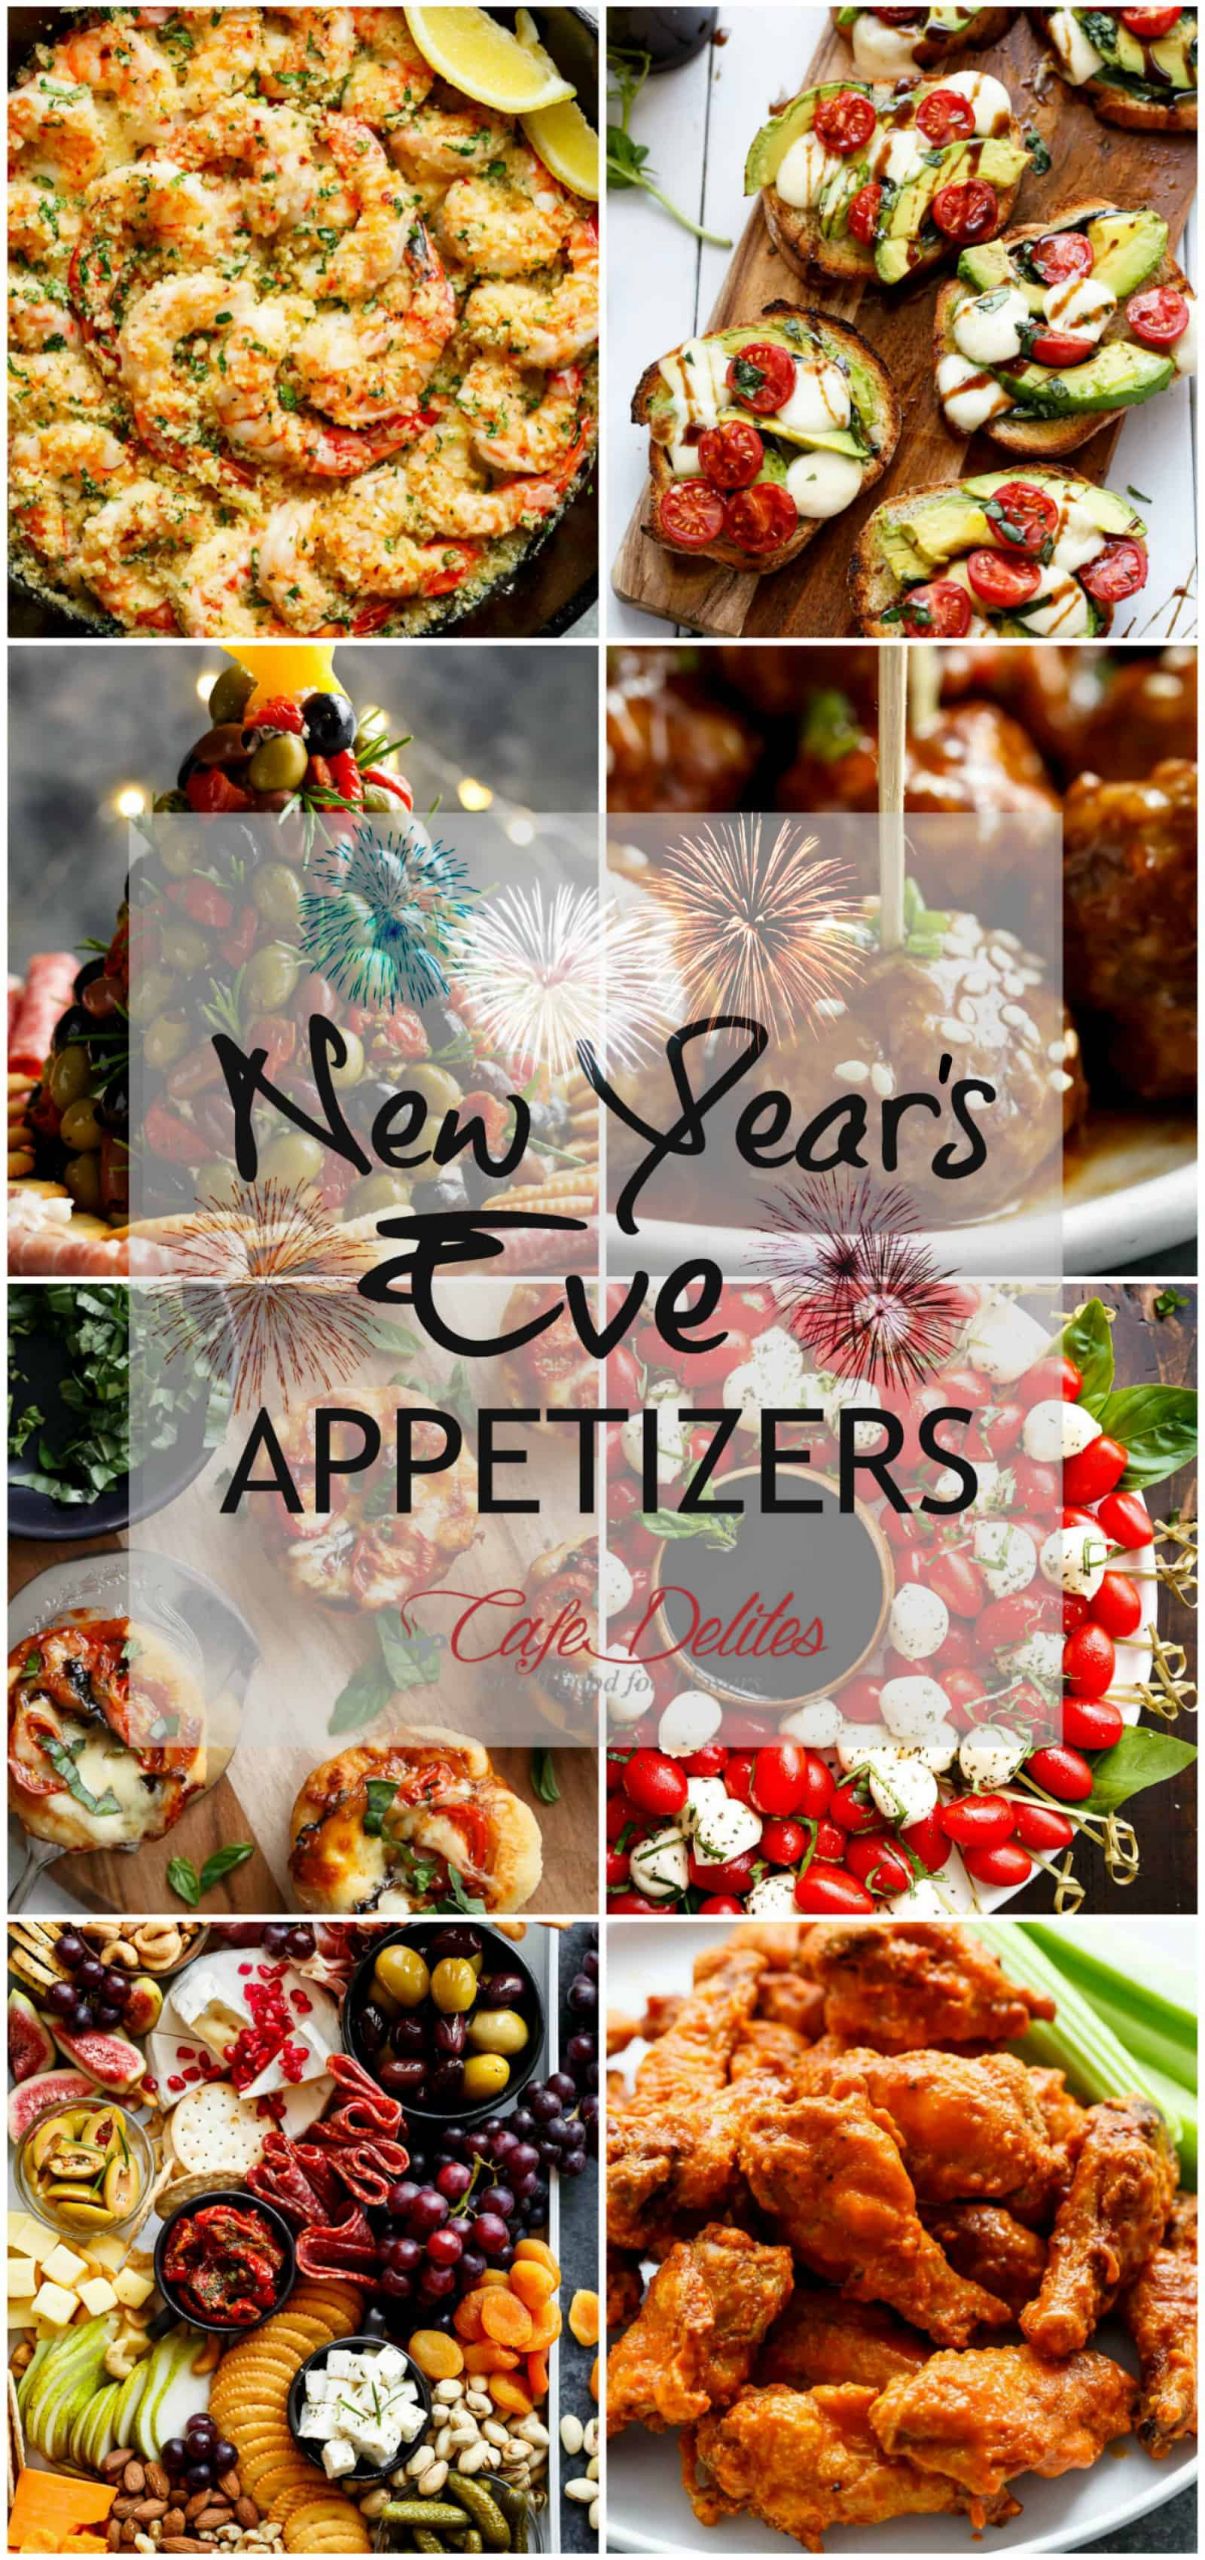 New Years Eve Appetizers Recipes
 The Best New Year s Eve Appetizers Cafe Delites